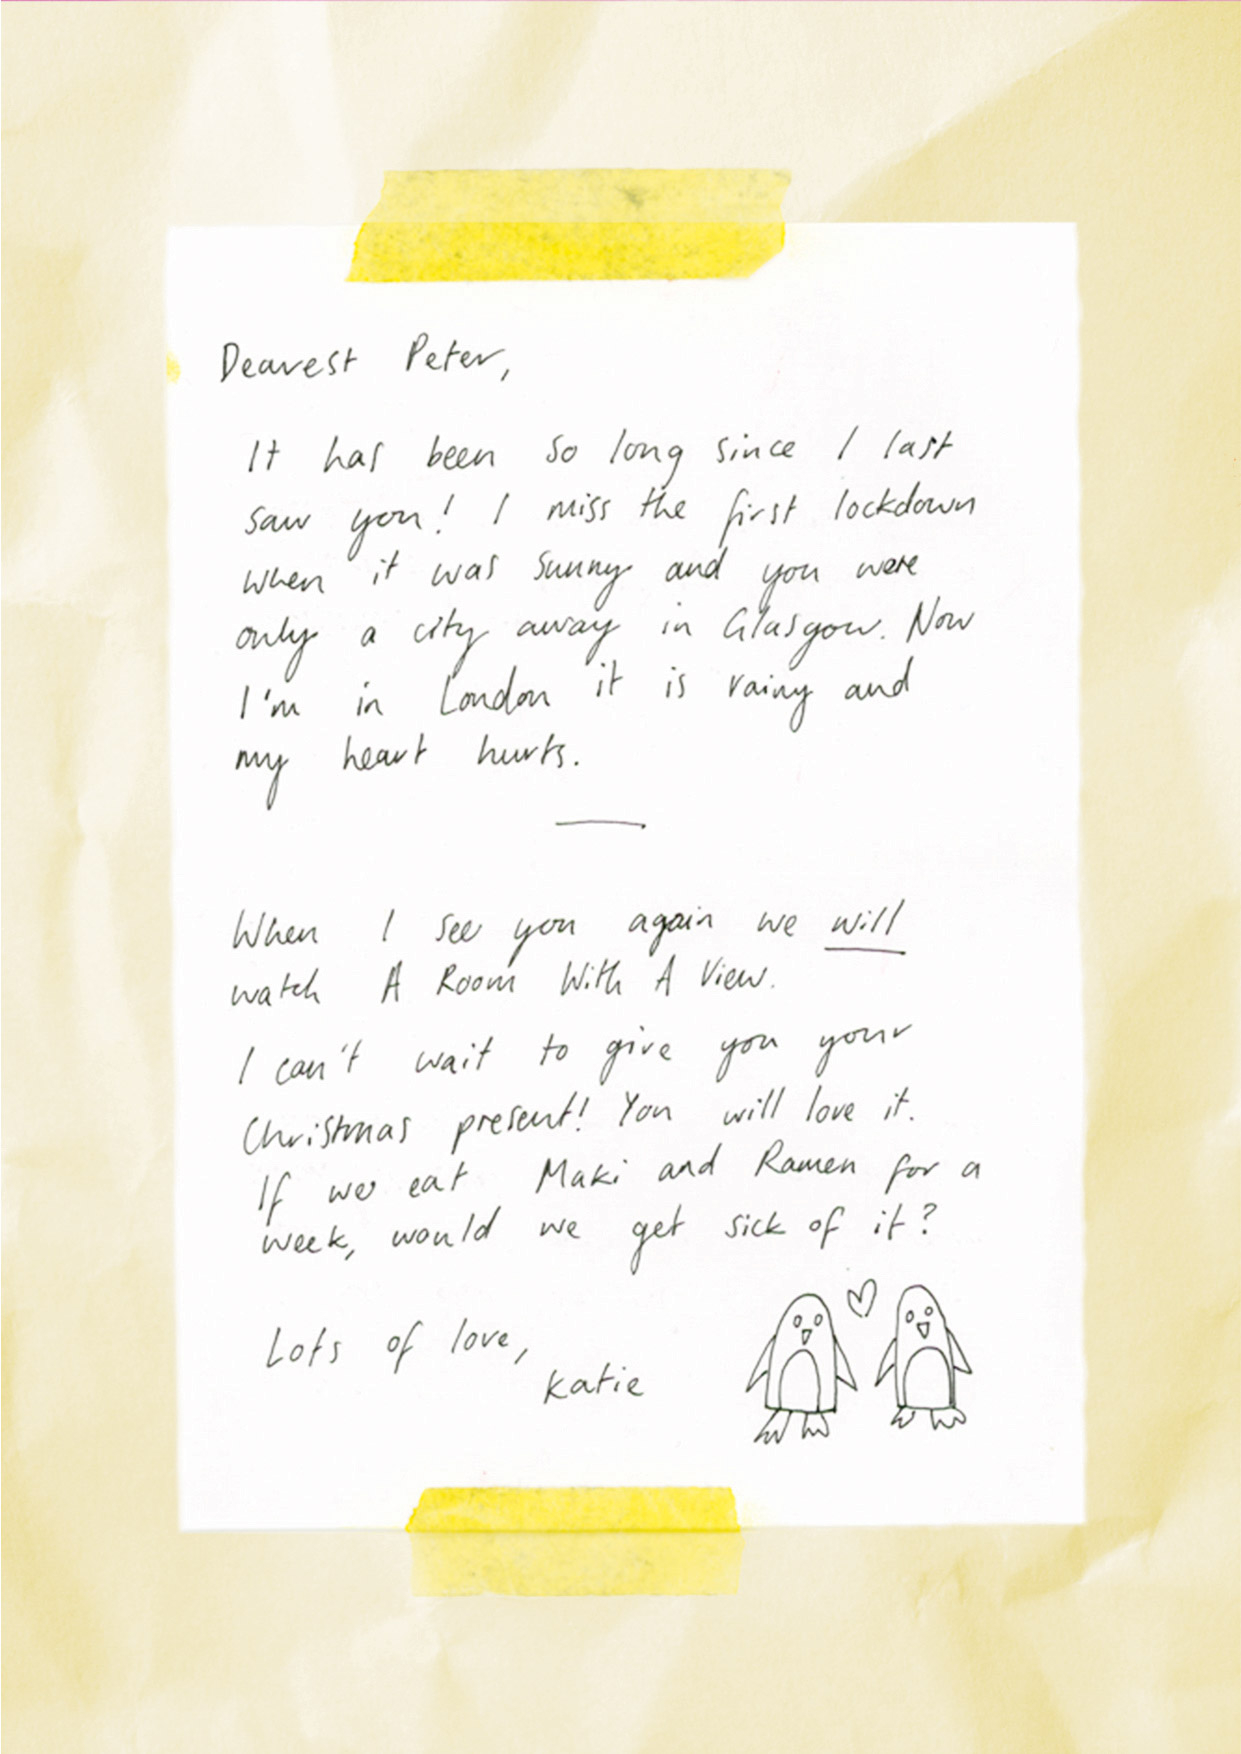 Letter from Katie to Peter